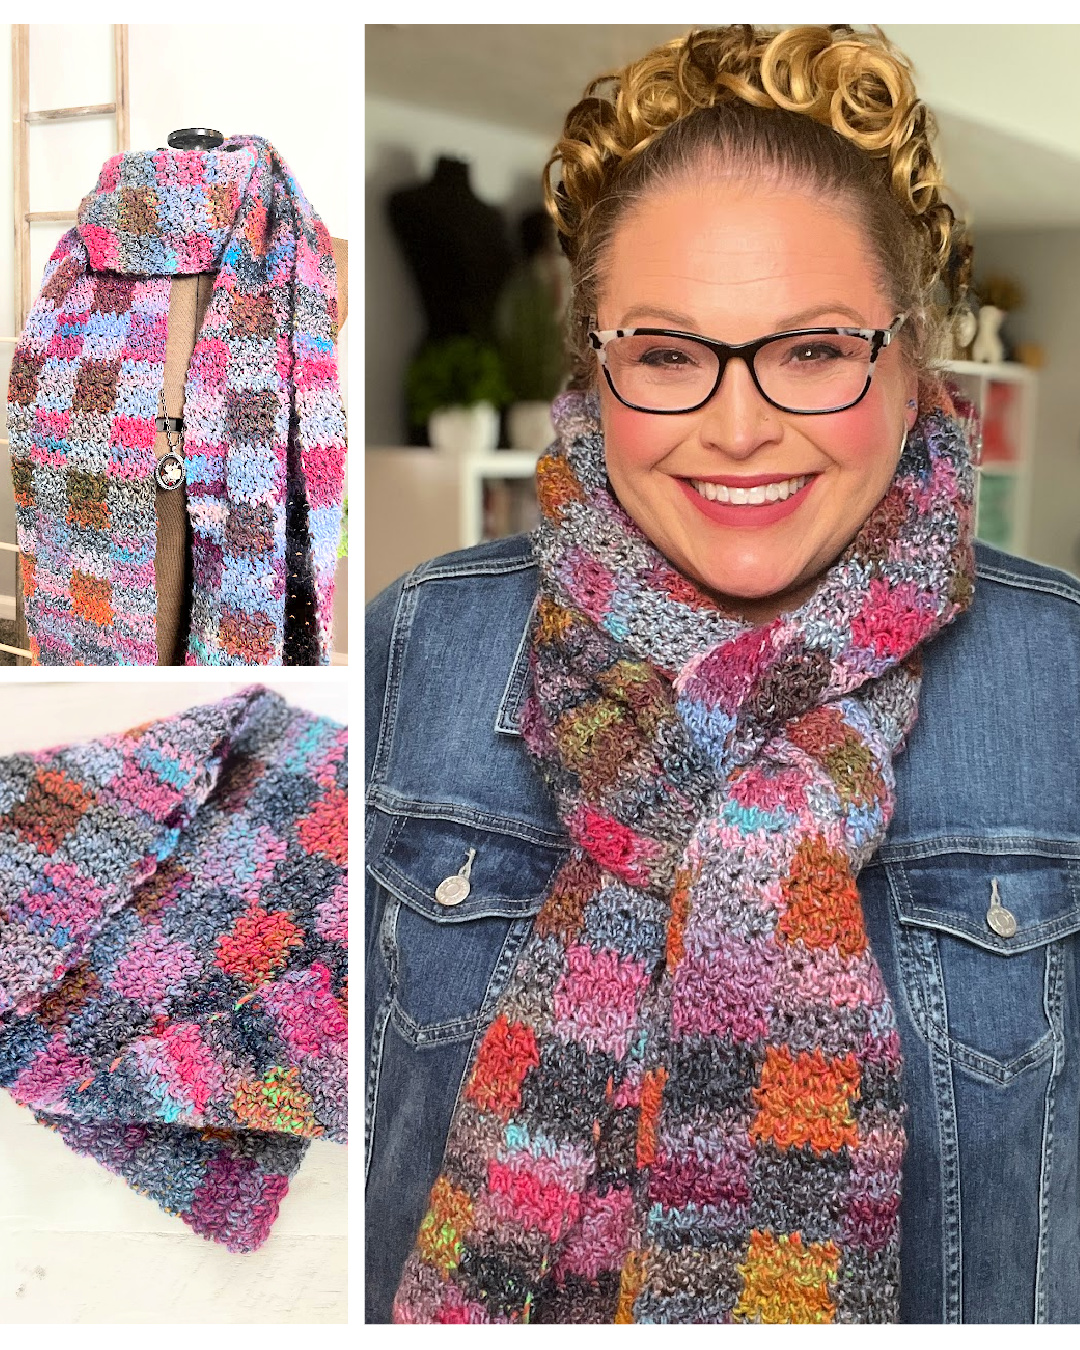 Collage image: Left side shows a colorful, chunky knit scarf with a checkered pattern. Right side features a person wearing the same plaid crochet scarf, smiling and dressed in a denim jacket with hair styled in curls. Background includes various decor items. -Marly Bird